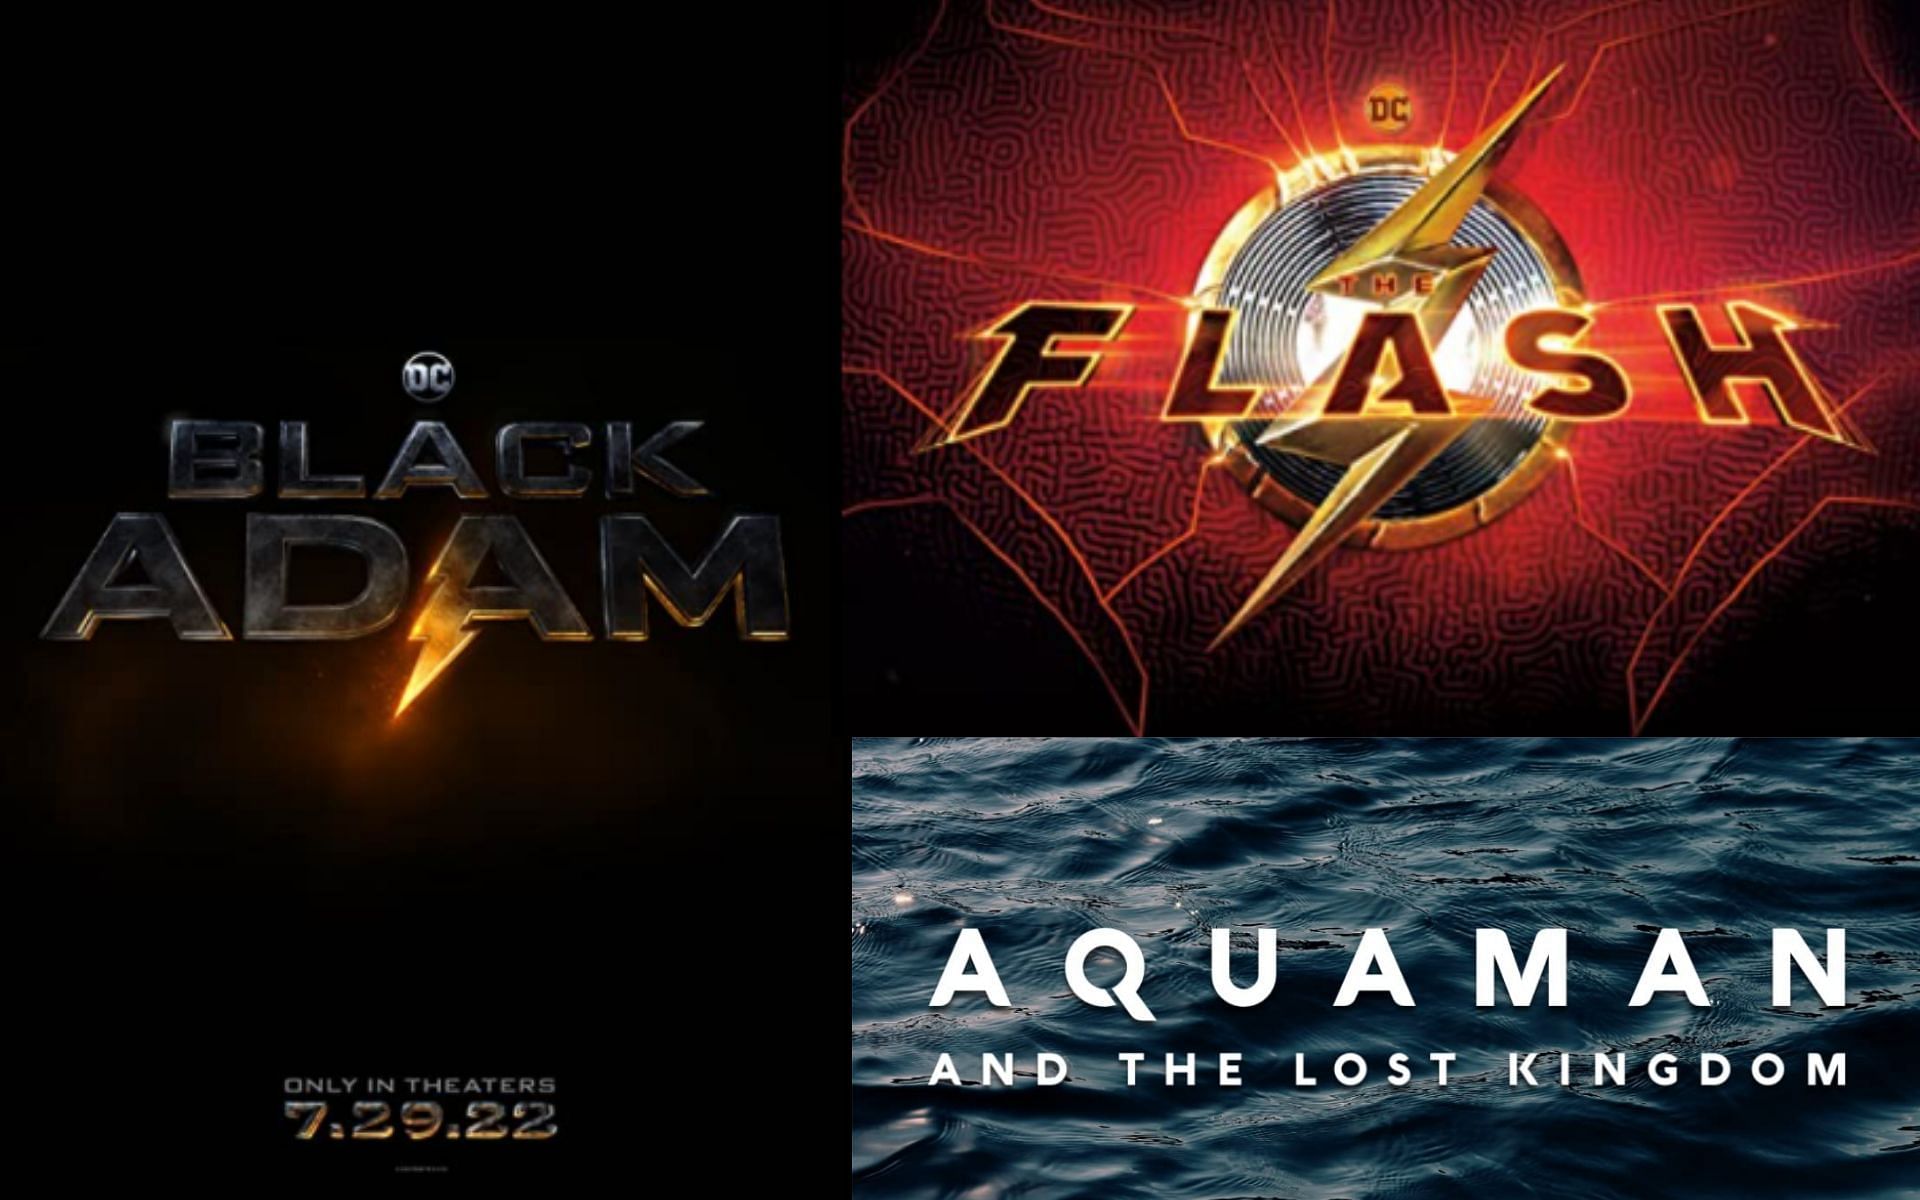 4 DC movies and their release dates